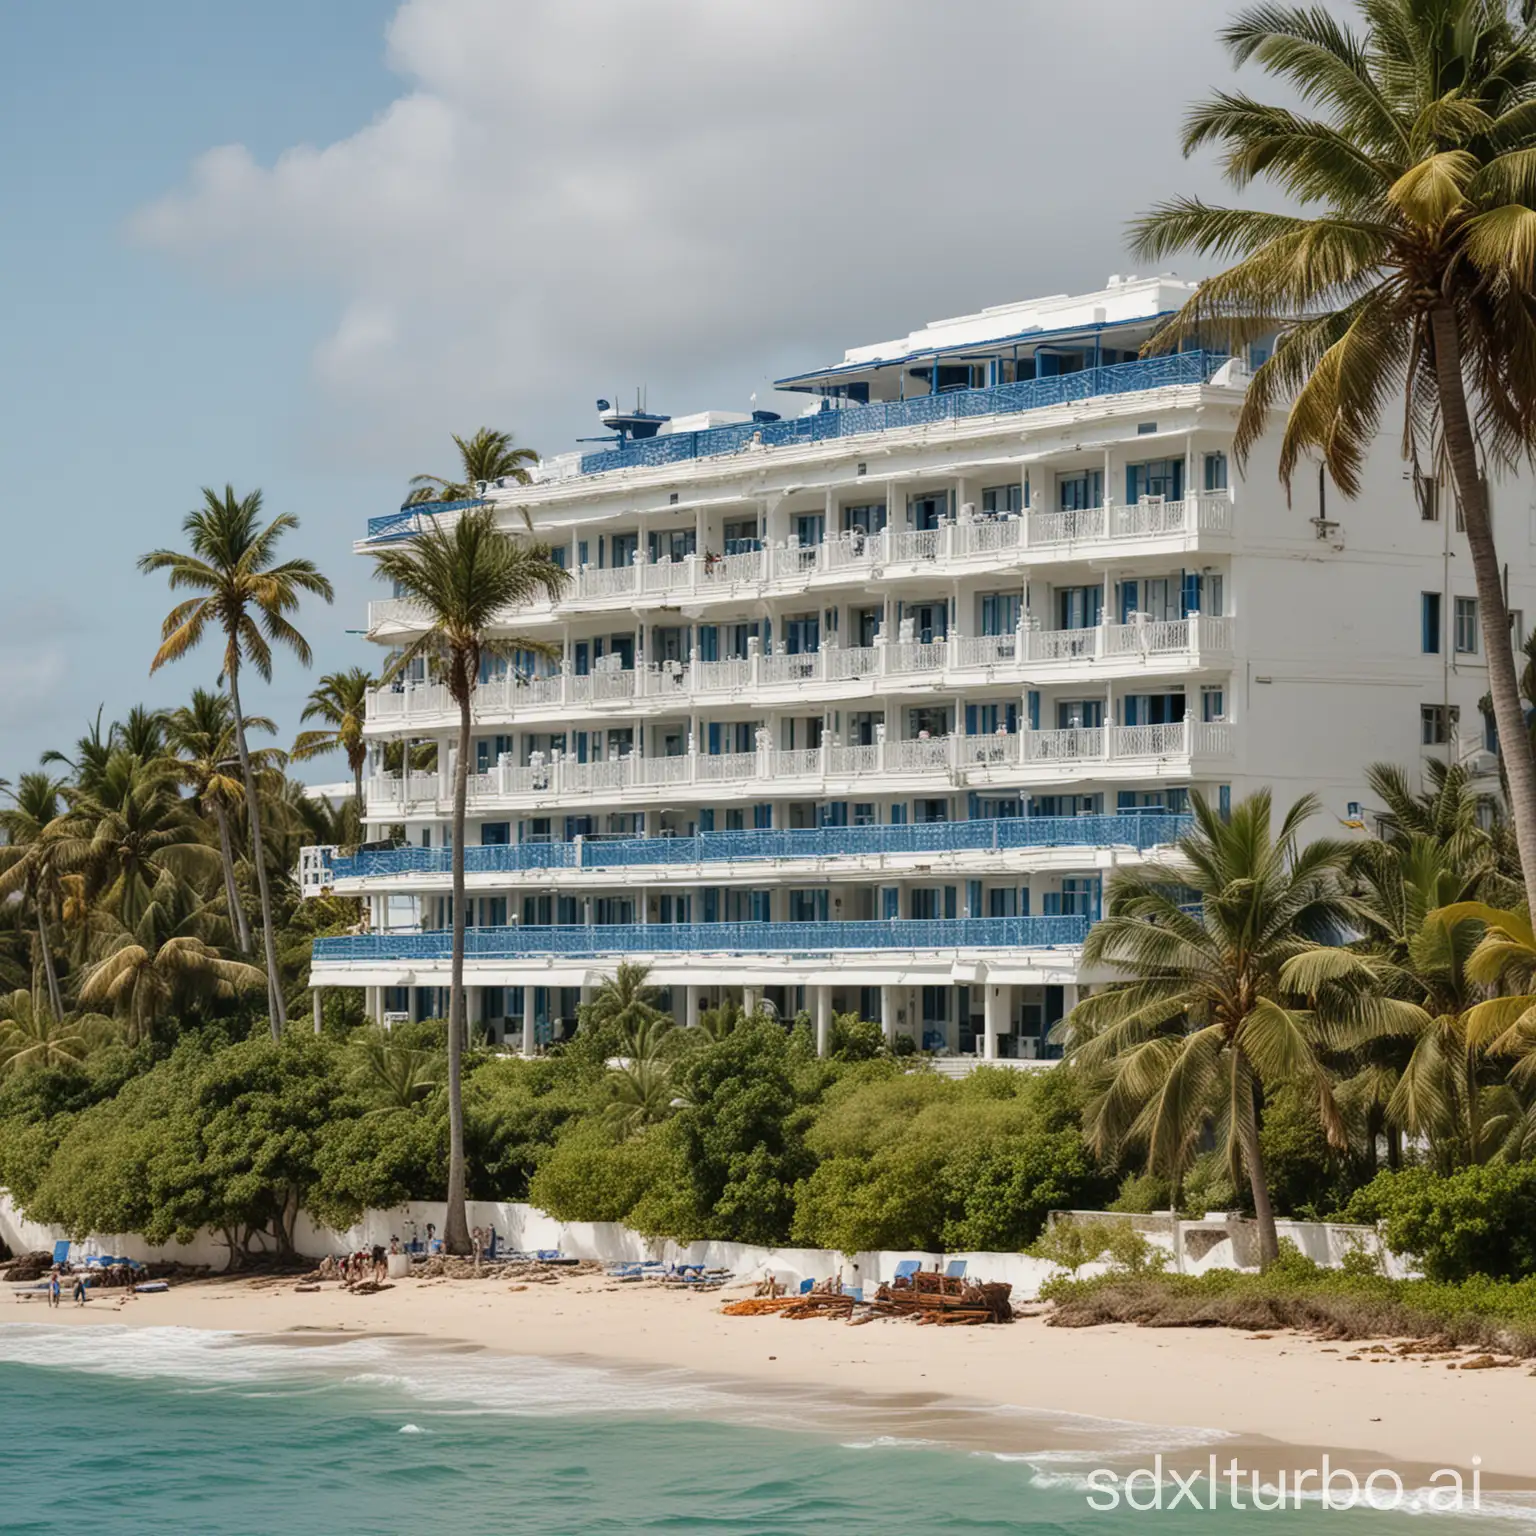 A large, white hotel building with a blue roof and balconies overlooking the ocean. The hotel is surrounded by palm trees and lush greenery.